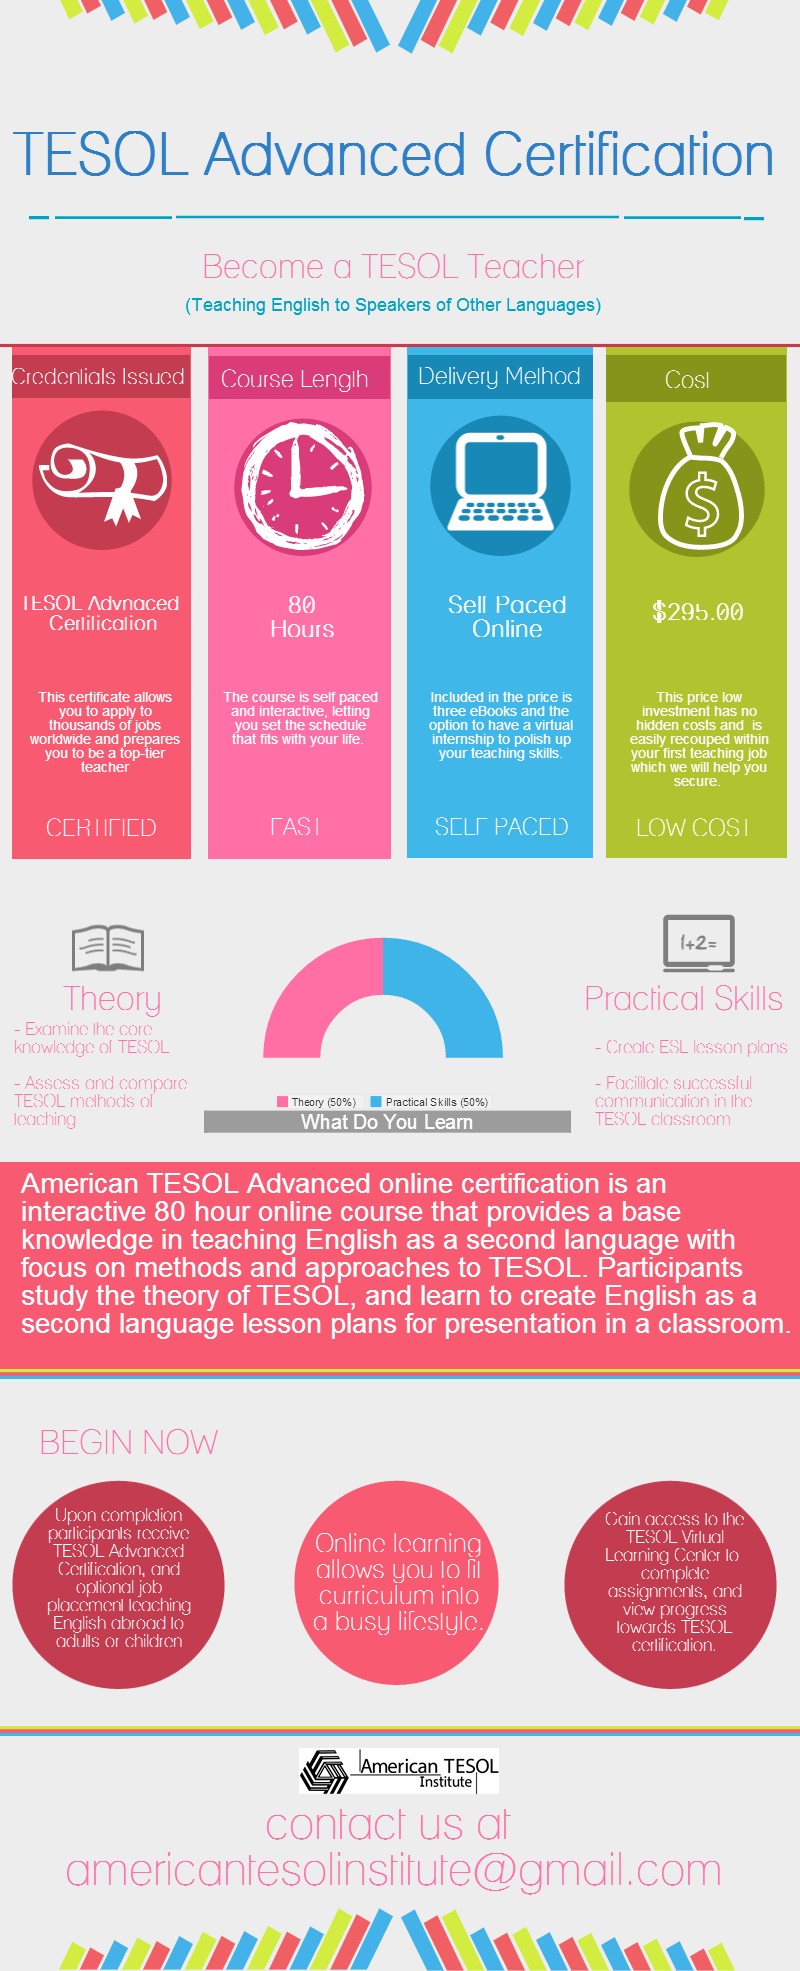 Learn more about TESOL Advanced Certification 